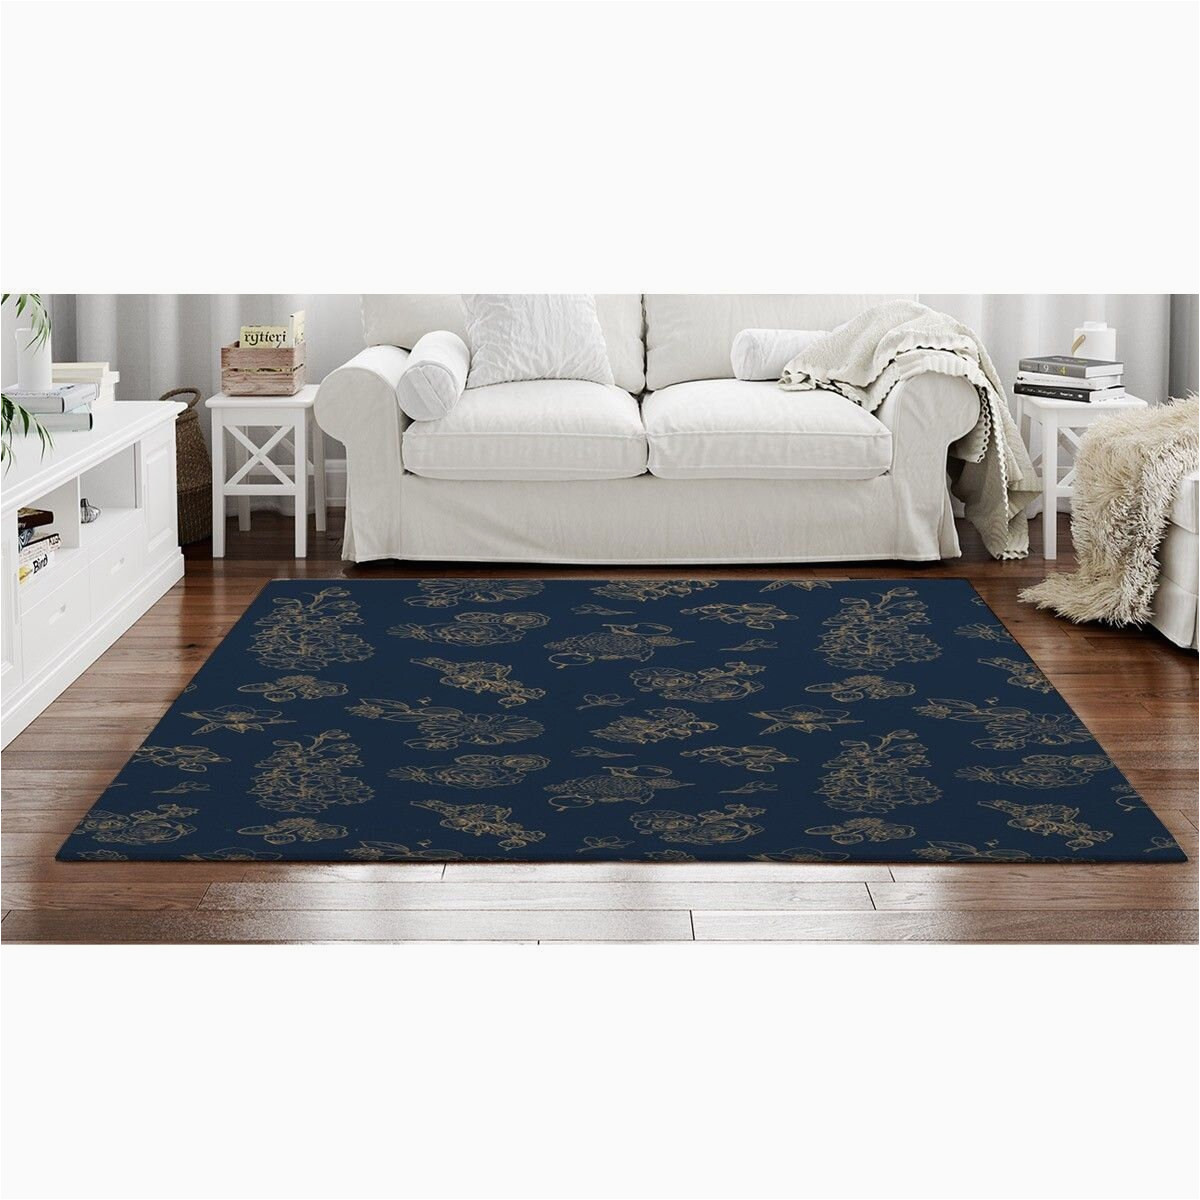 Blue and White Floral area Rugs Blue Floral Rugs Floral area Rug Navy Blue Colored Rugs – Etsy.de